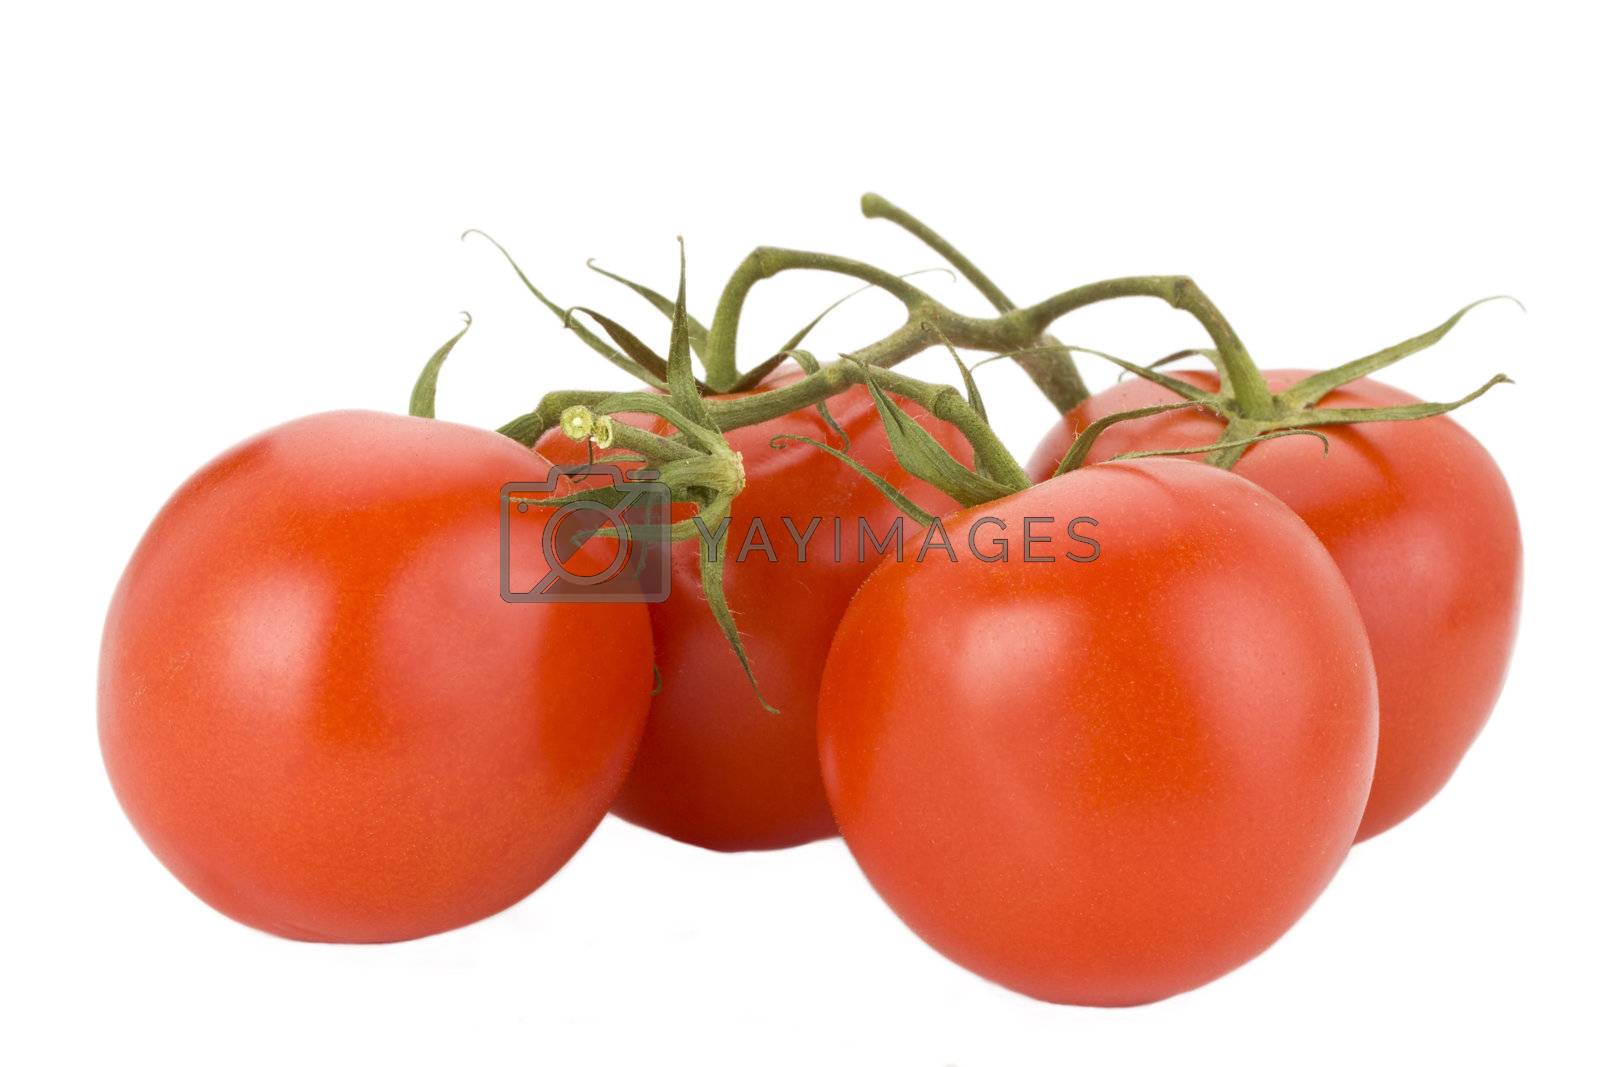 Royalty free image of four tomatoes isolated on white background by bernjuer